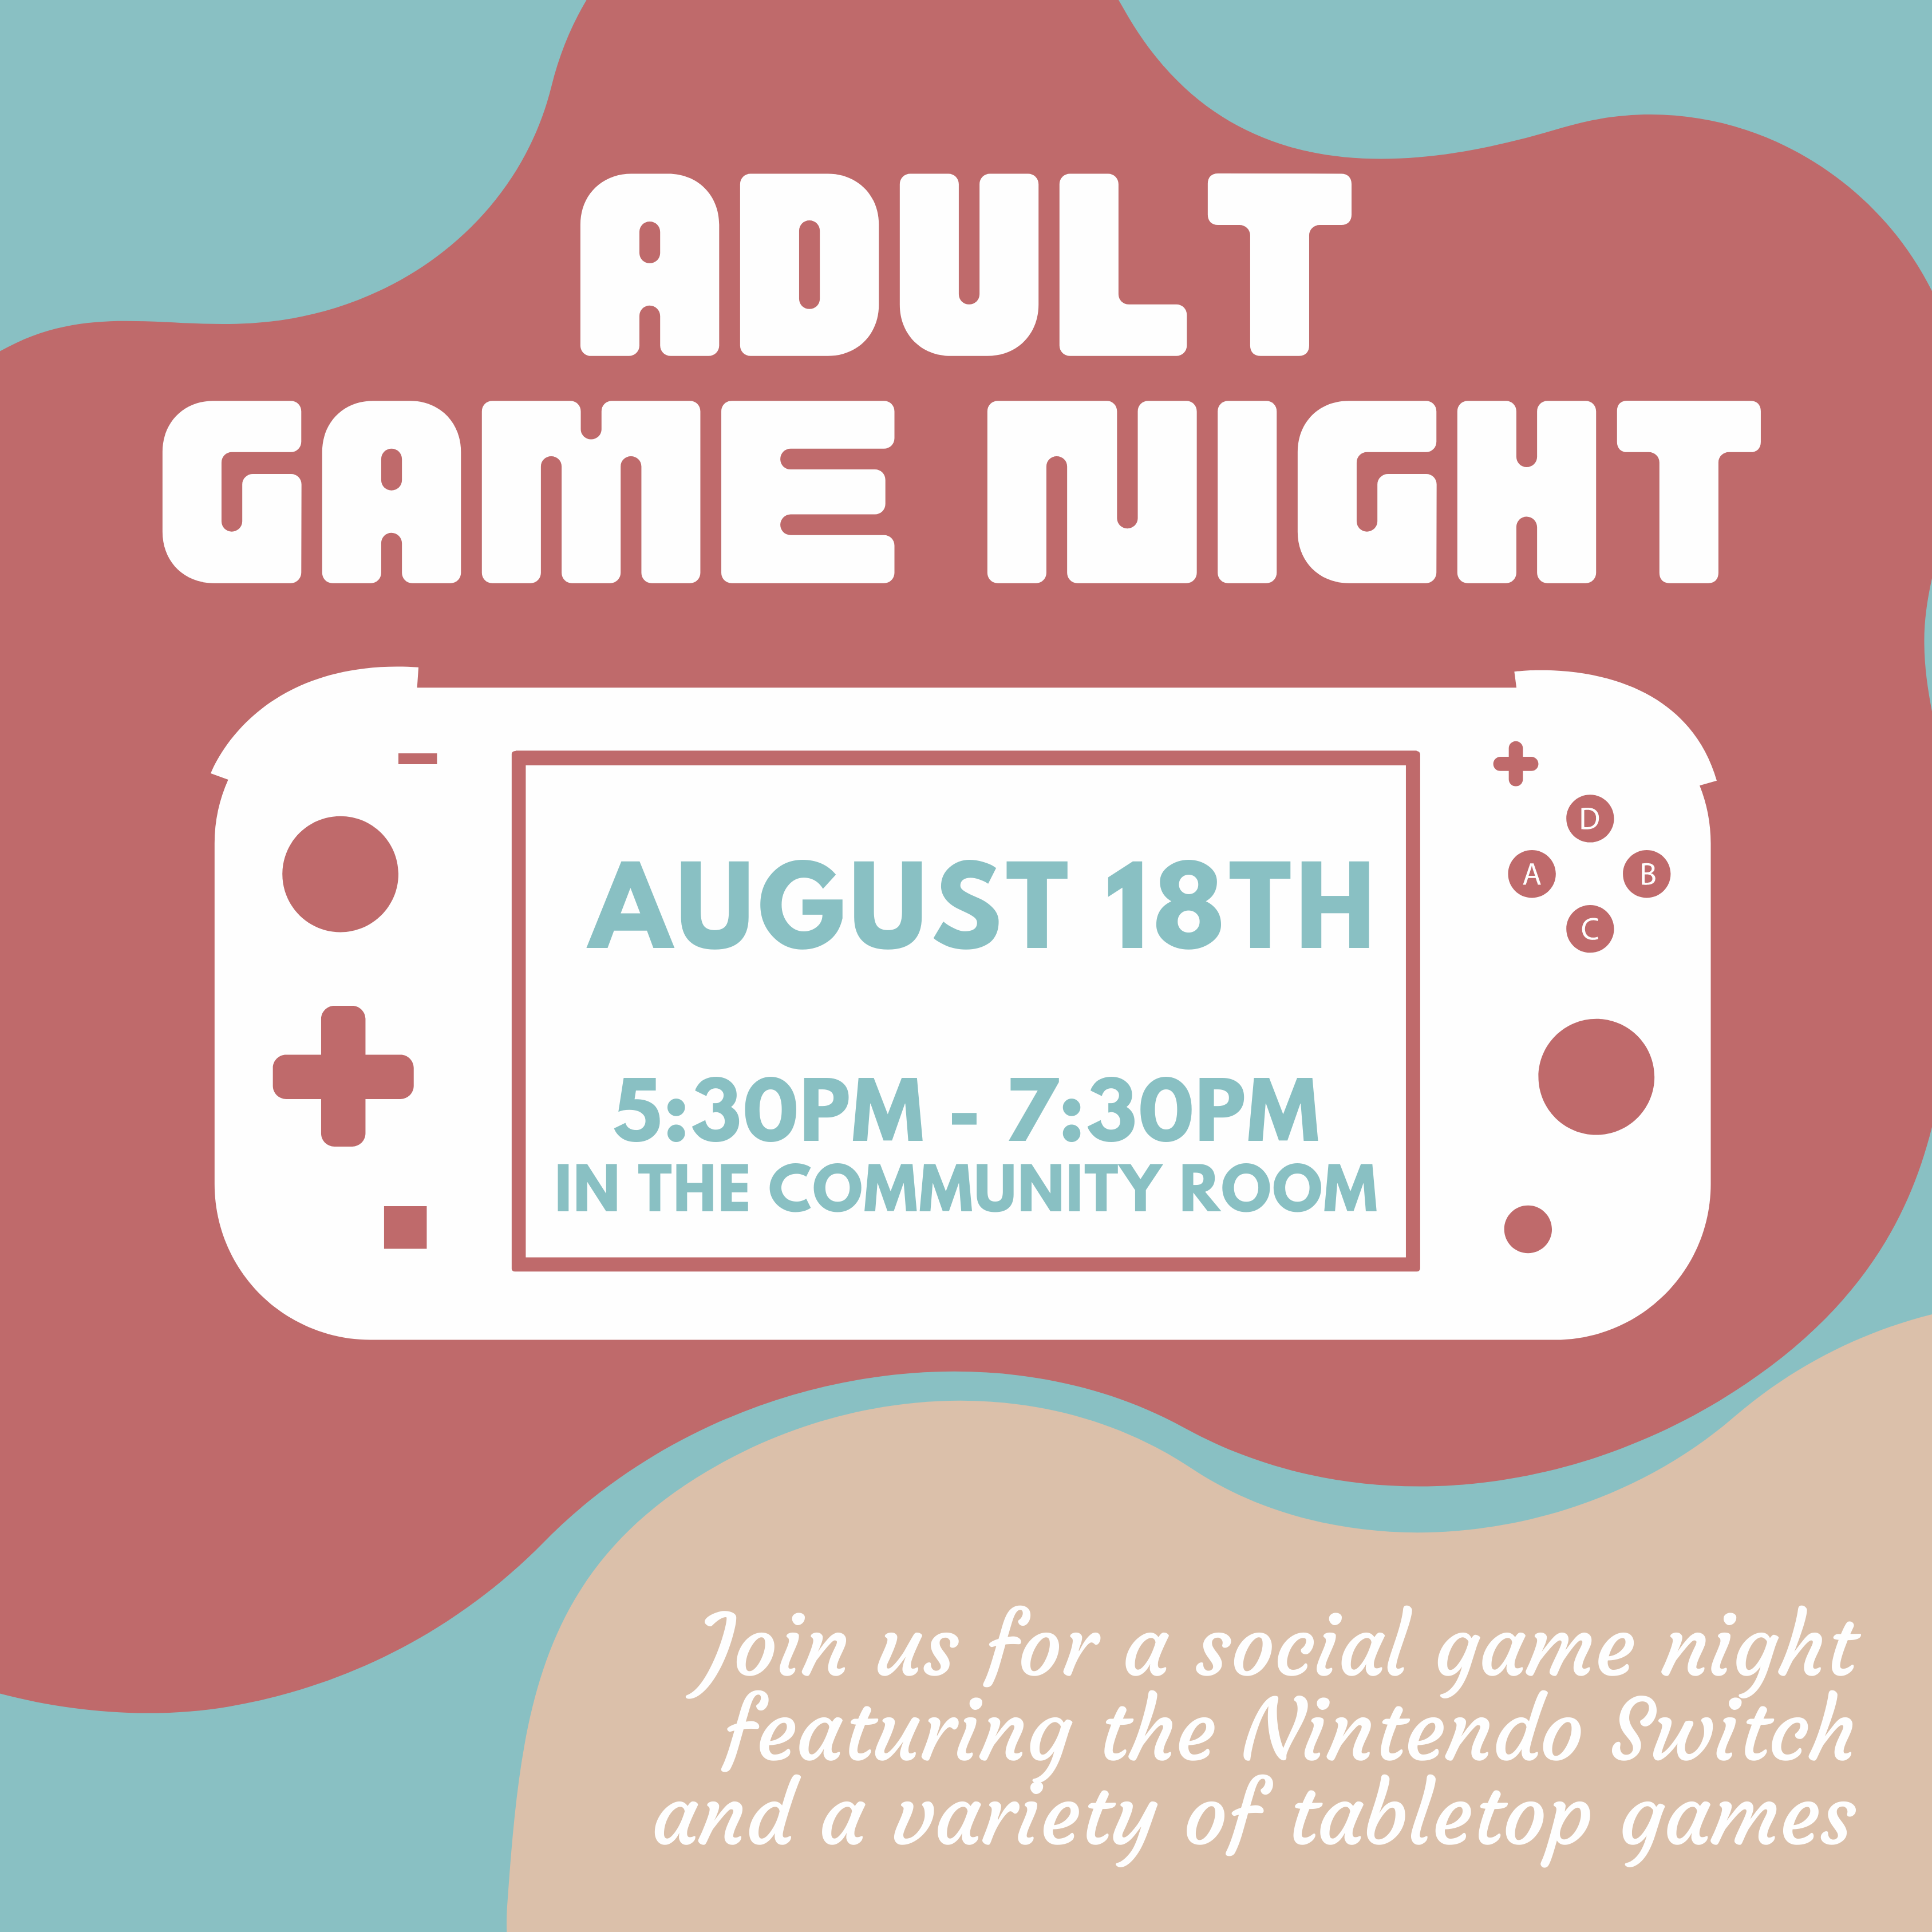 Video Game Night for adults 18+. August 18th  from 5:30PM to 7:30PM In the community room. Join us for a social game night featuring the Nintendo Switch and a variety of tabletop games.